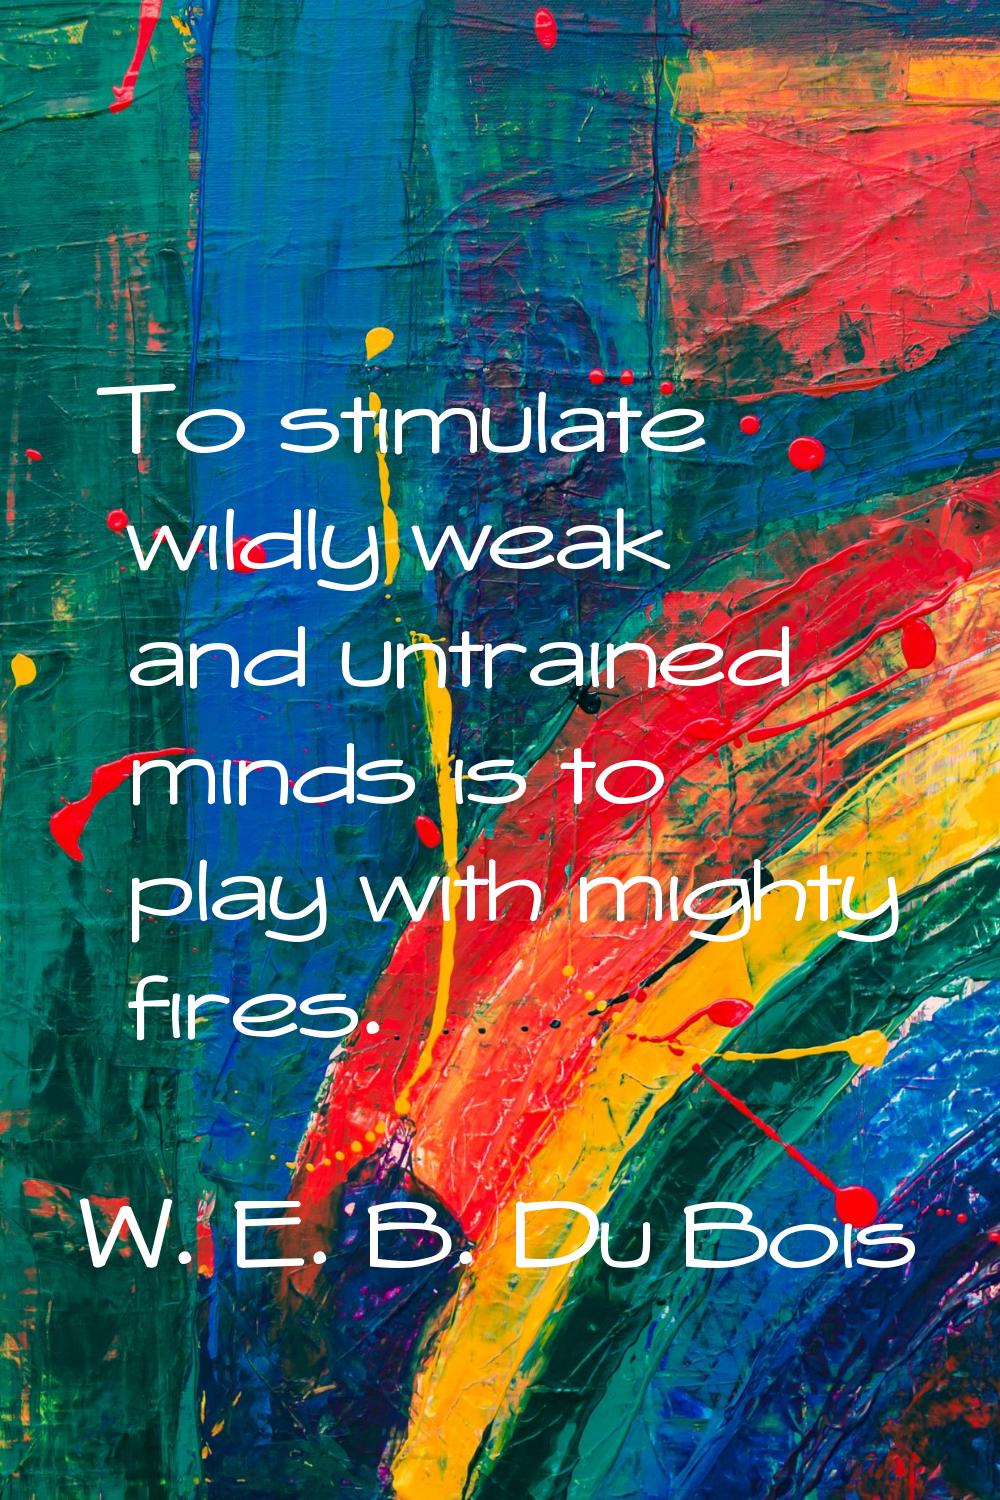 To stimulate wildly weak and untrained minds is to play with mighty fires.